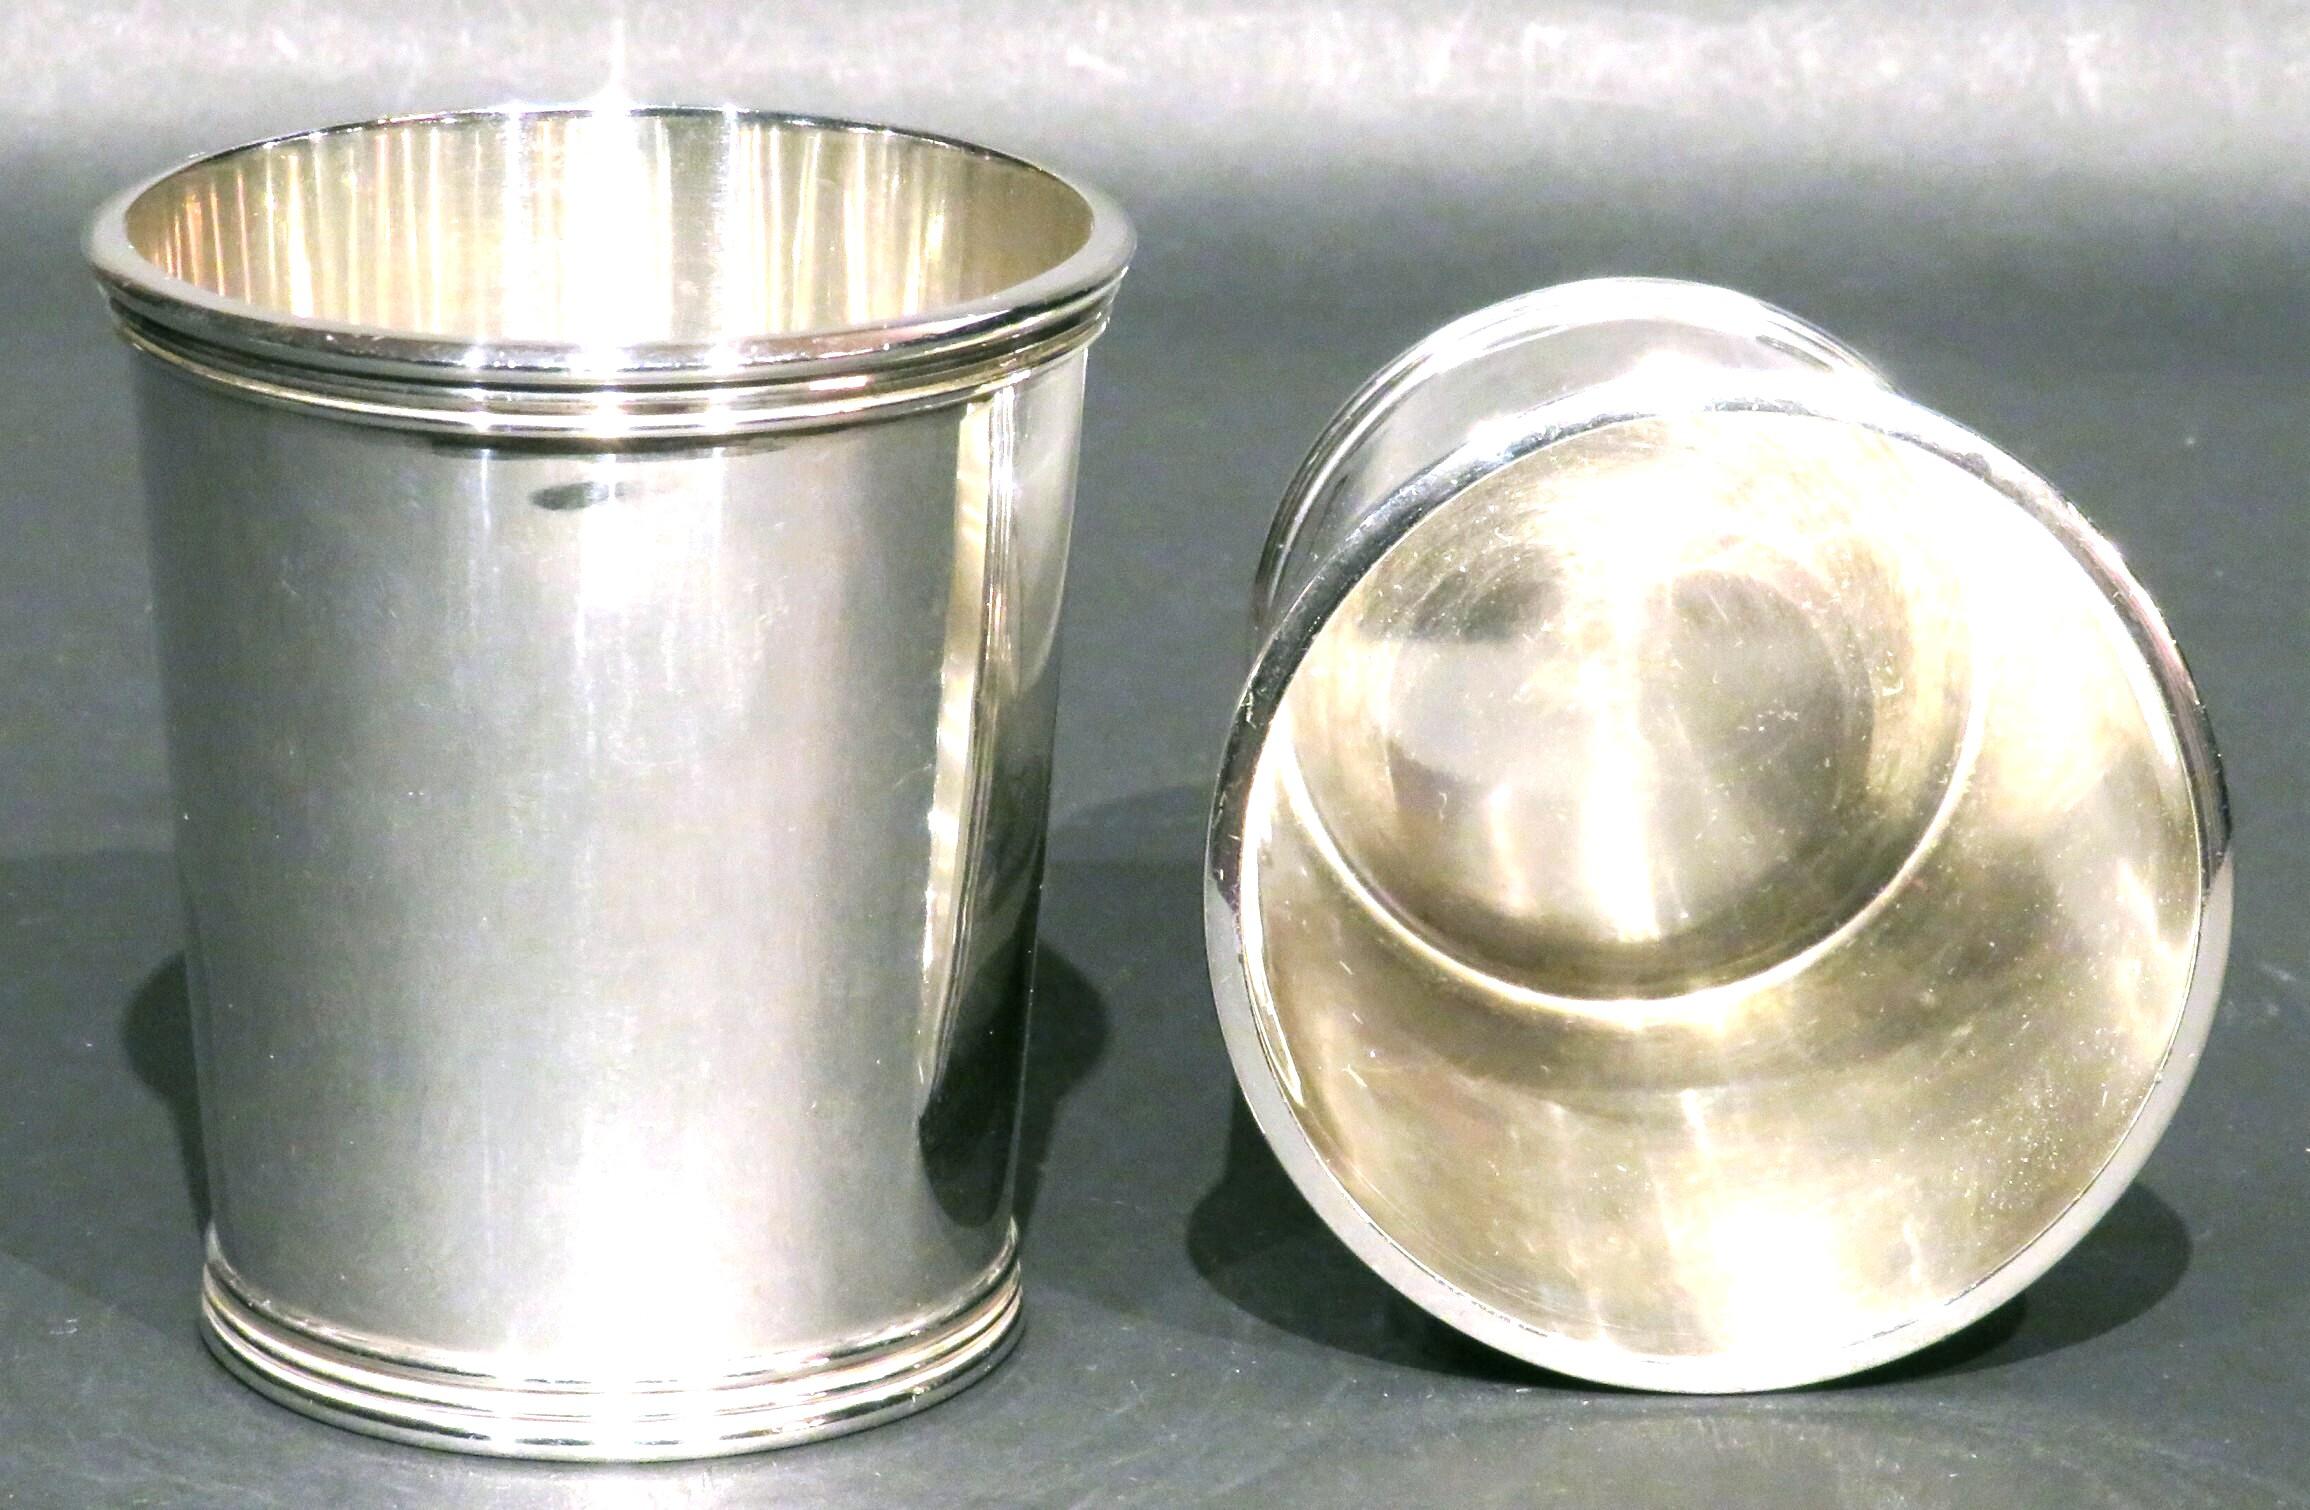 silver cups for sale